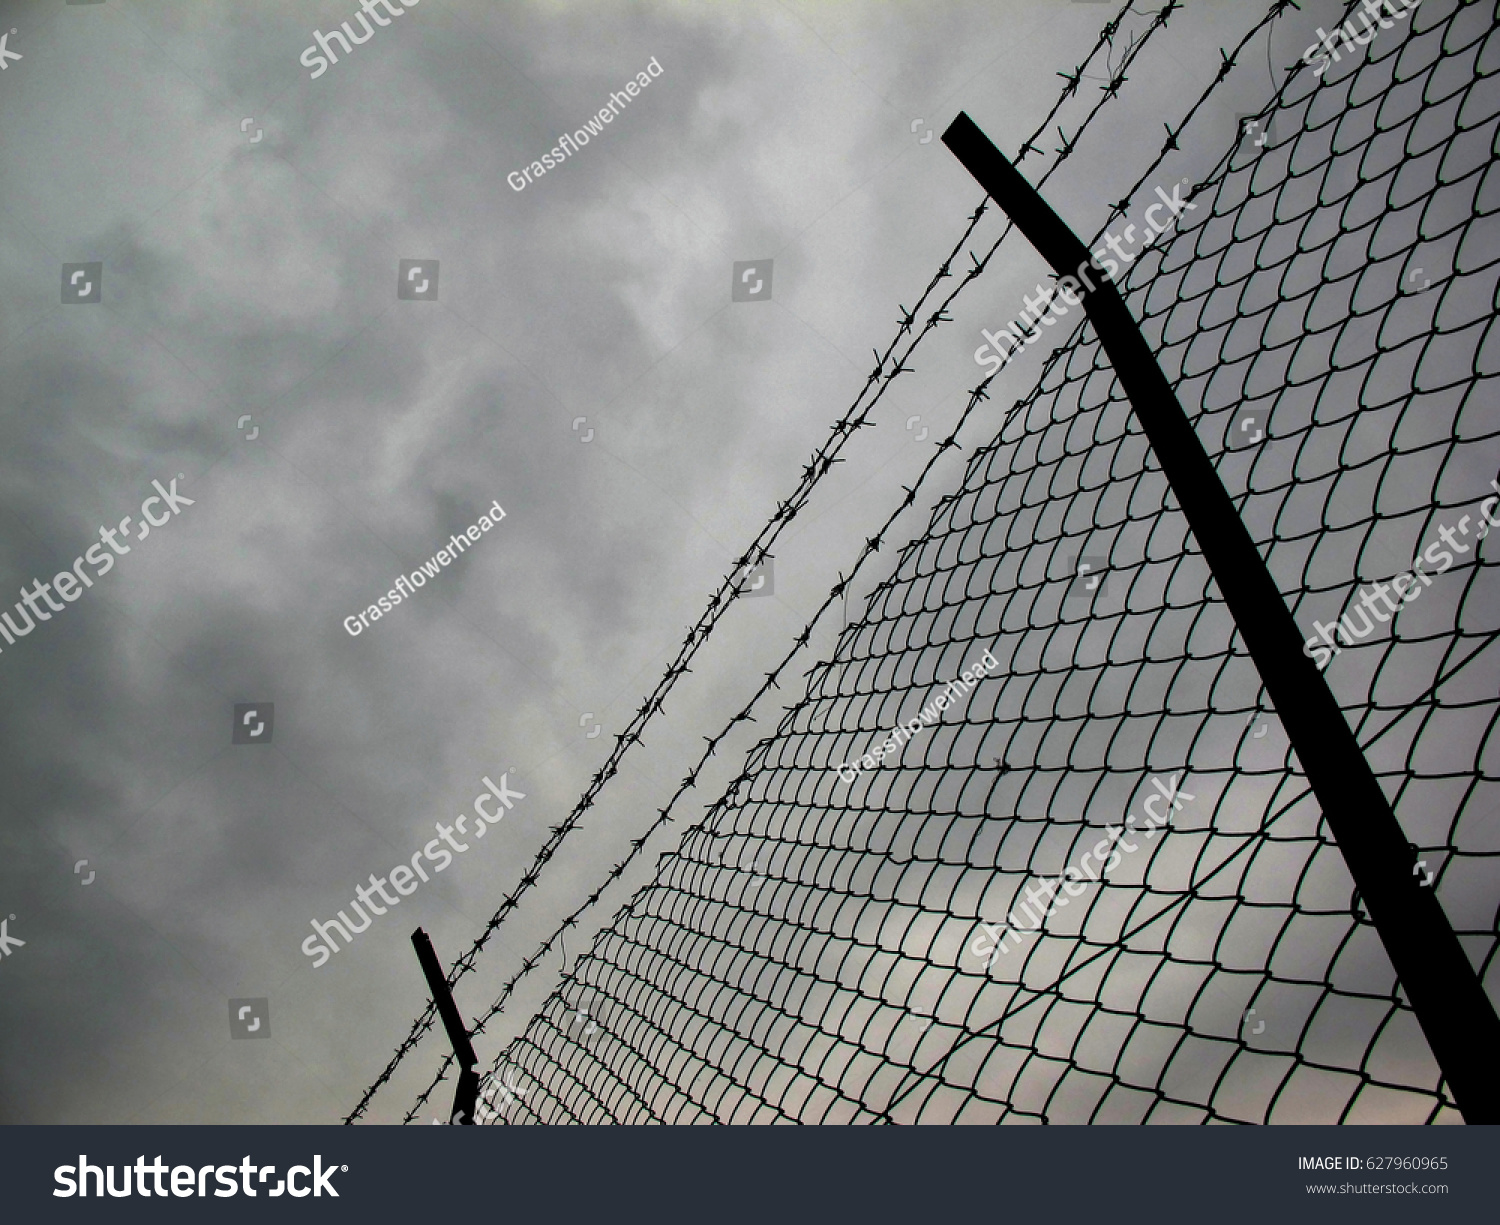 Low angle view of barbed wire and chain link fence against cloudy sky #627960965